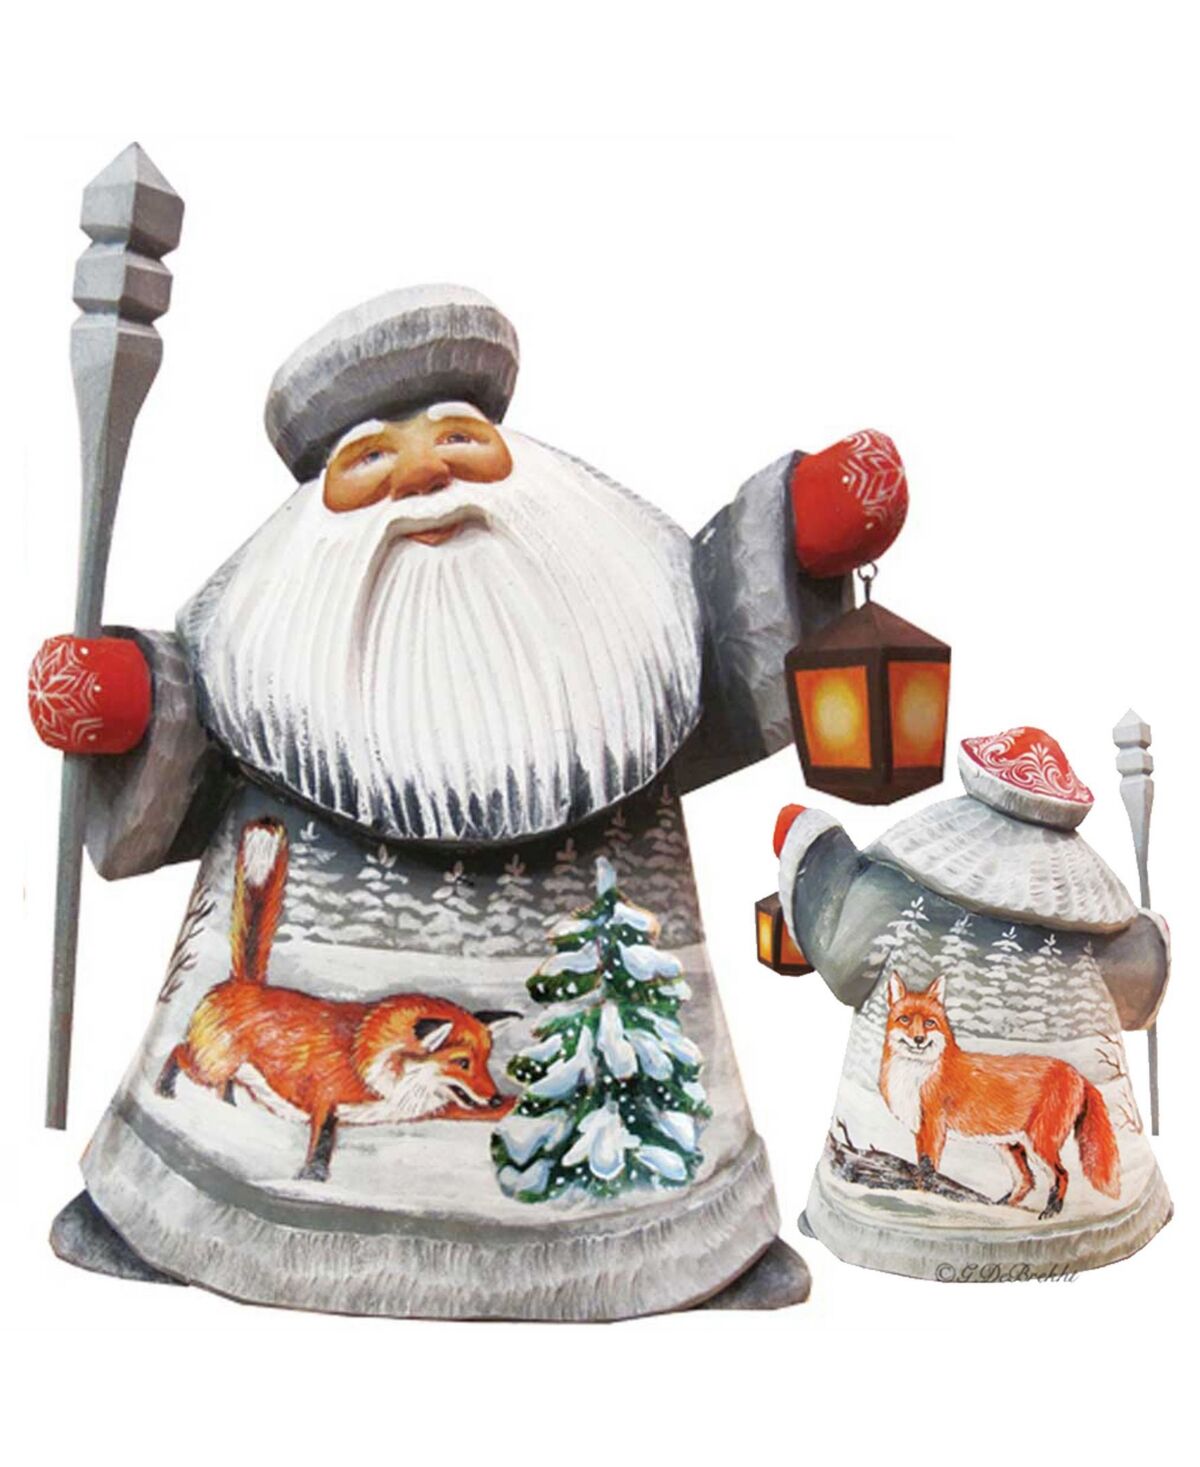 G.DeBrekht Woodcarved and Hand Painted Santa Foxy Play Father Frost Figurine - Multi